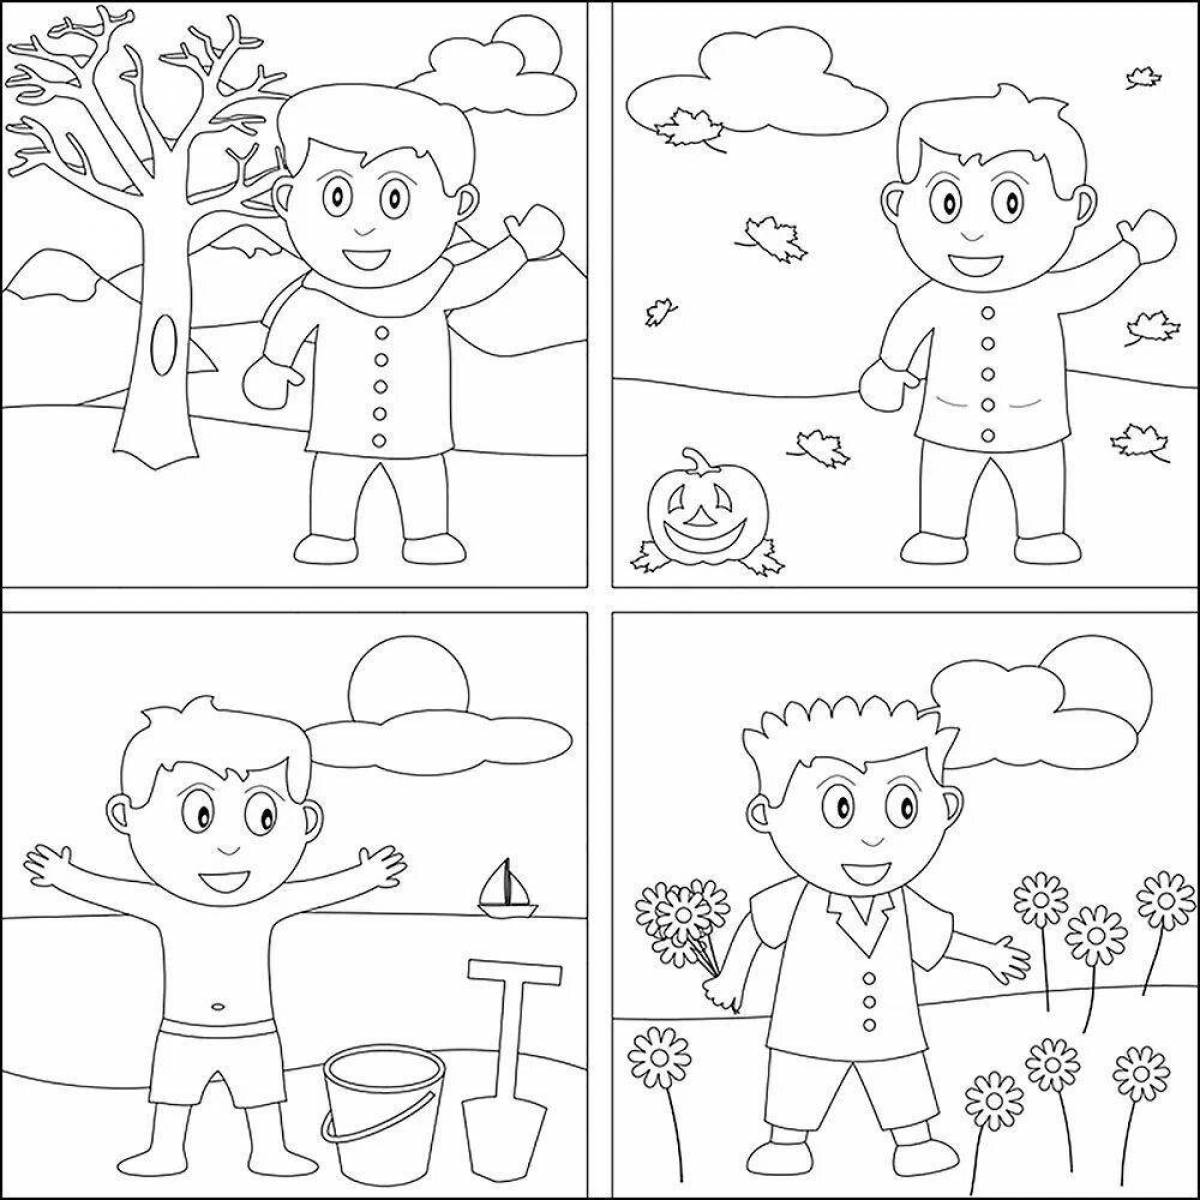 A fun summer coloring book for kids